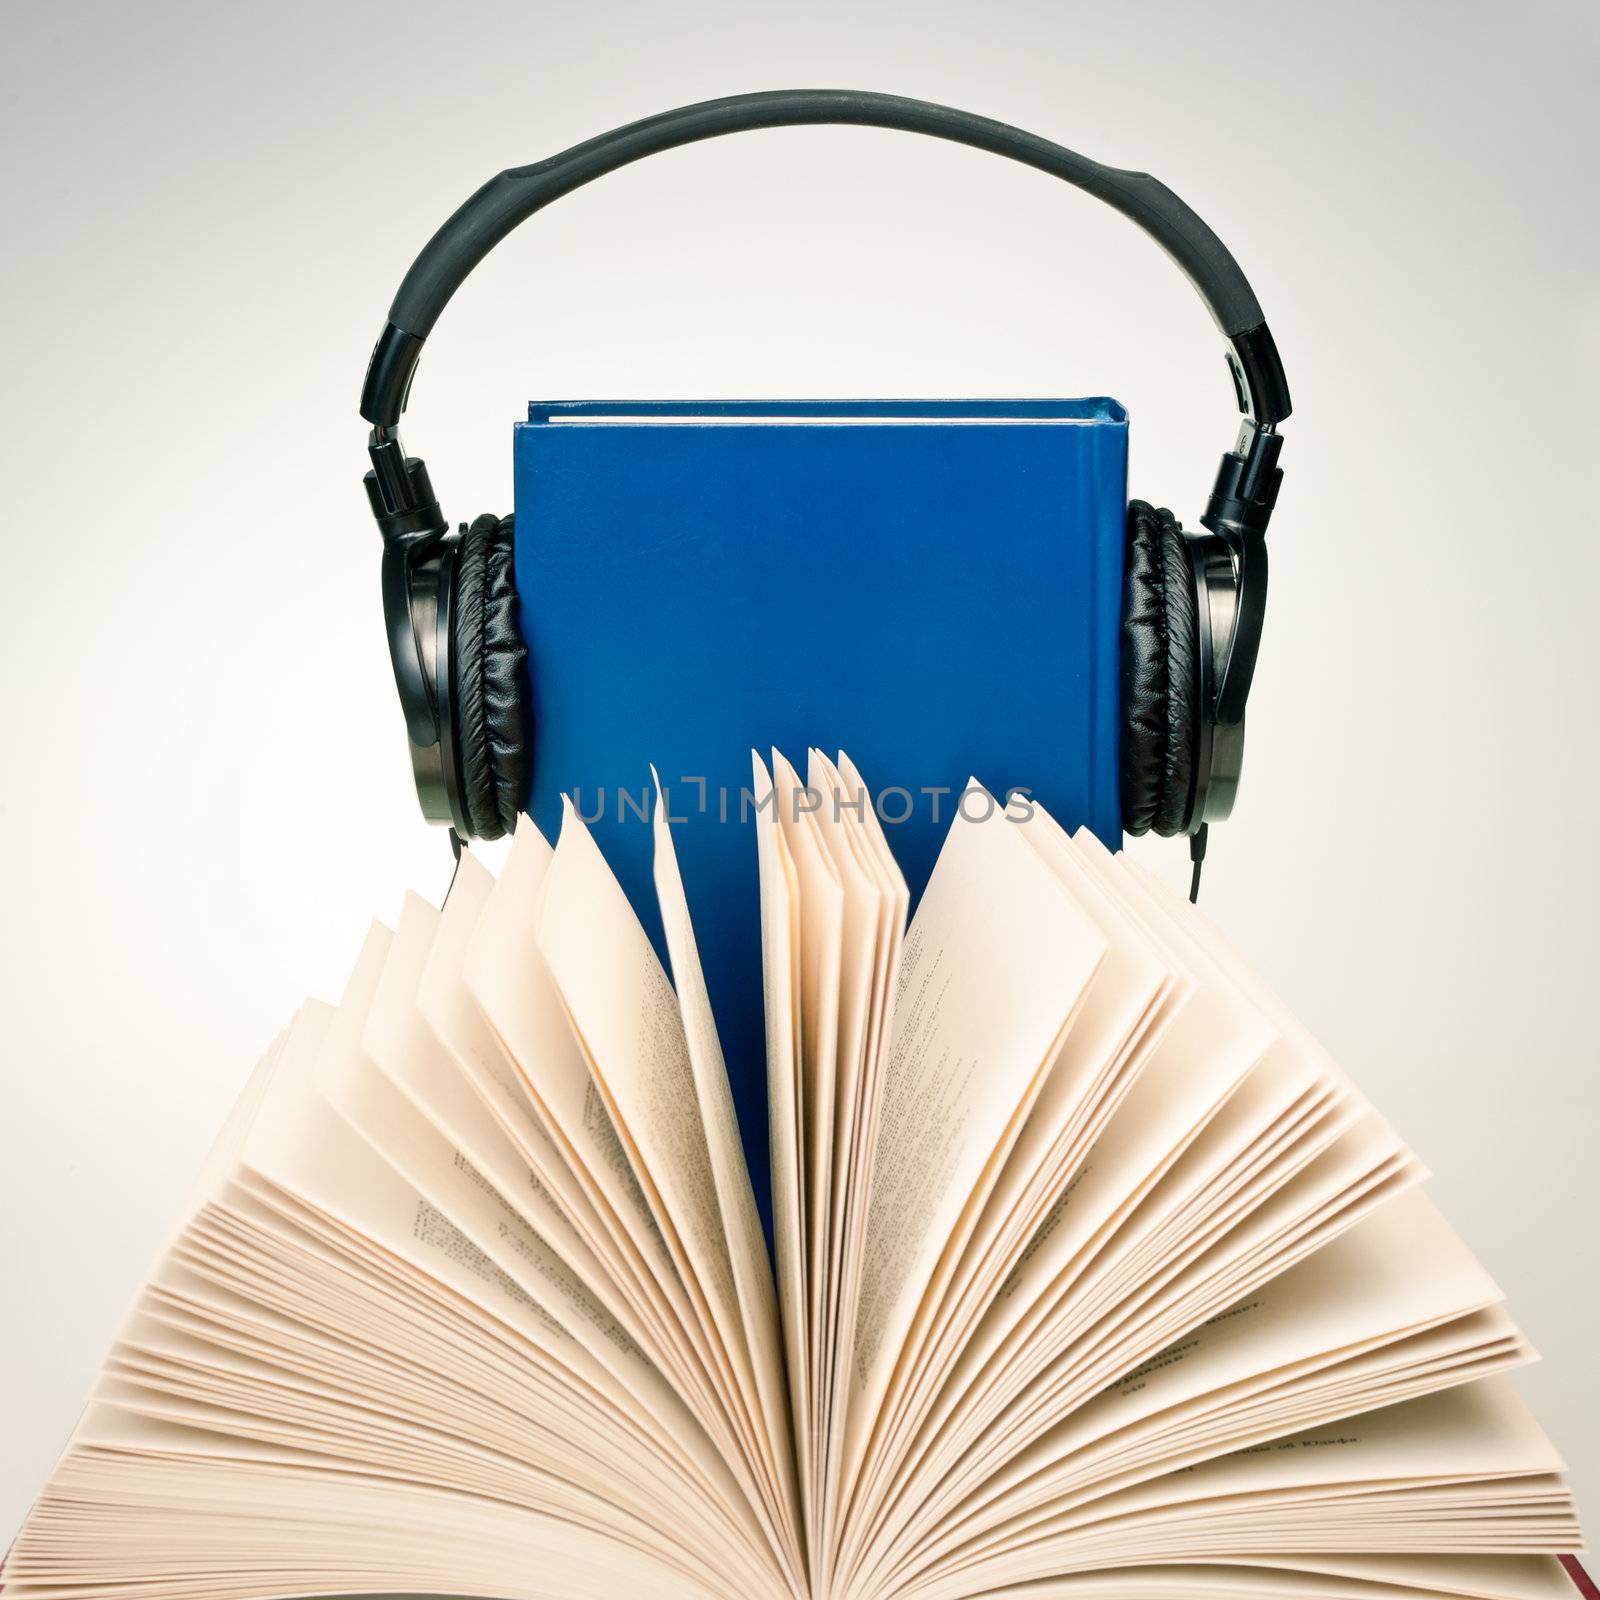 Open book with HI-Fi headphones on a blue book at background